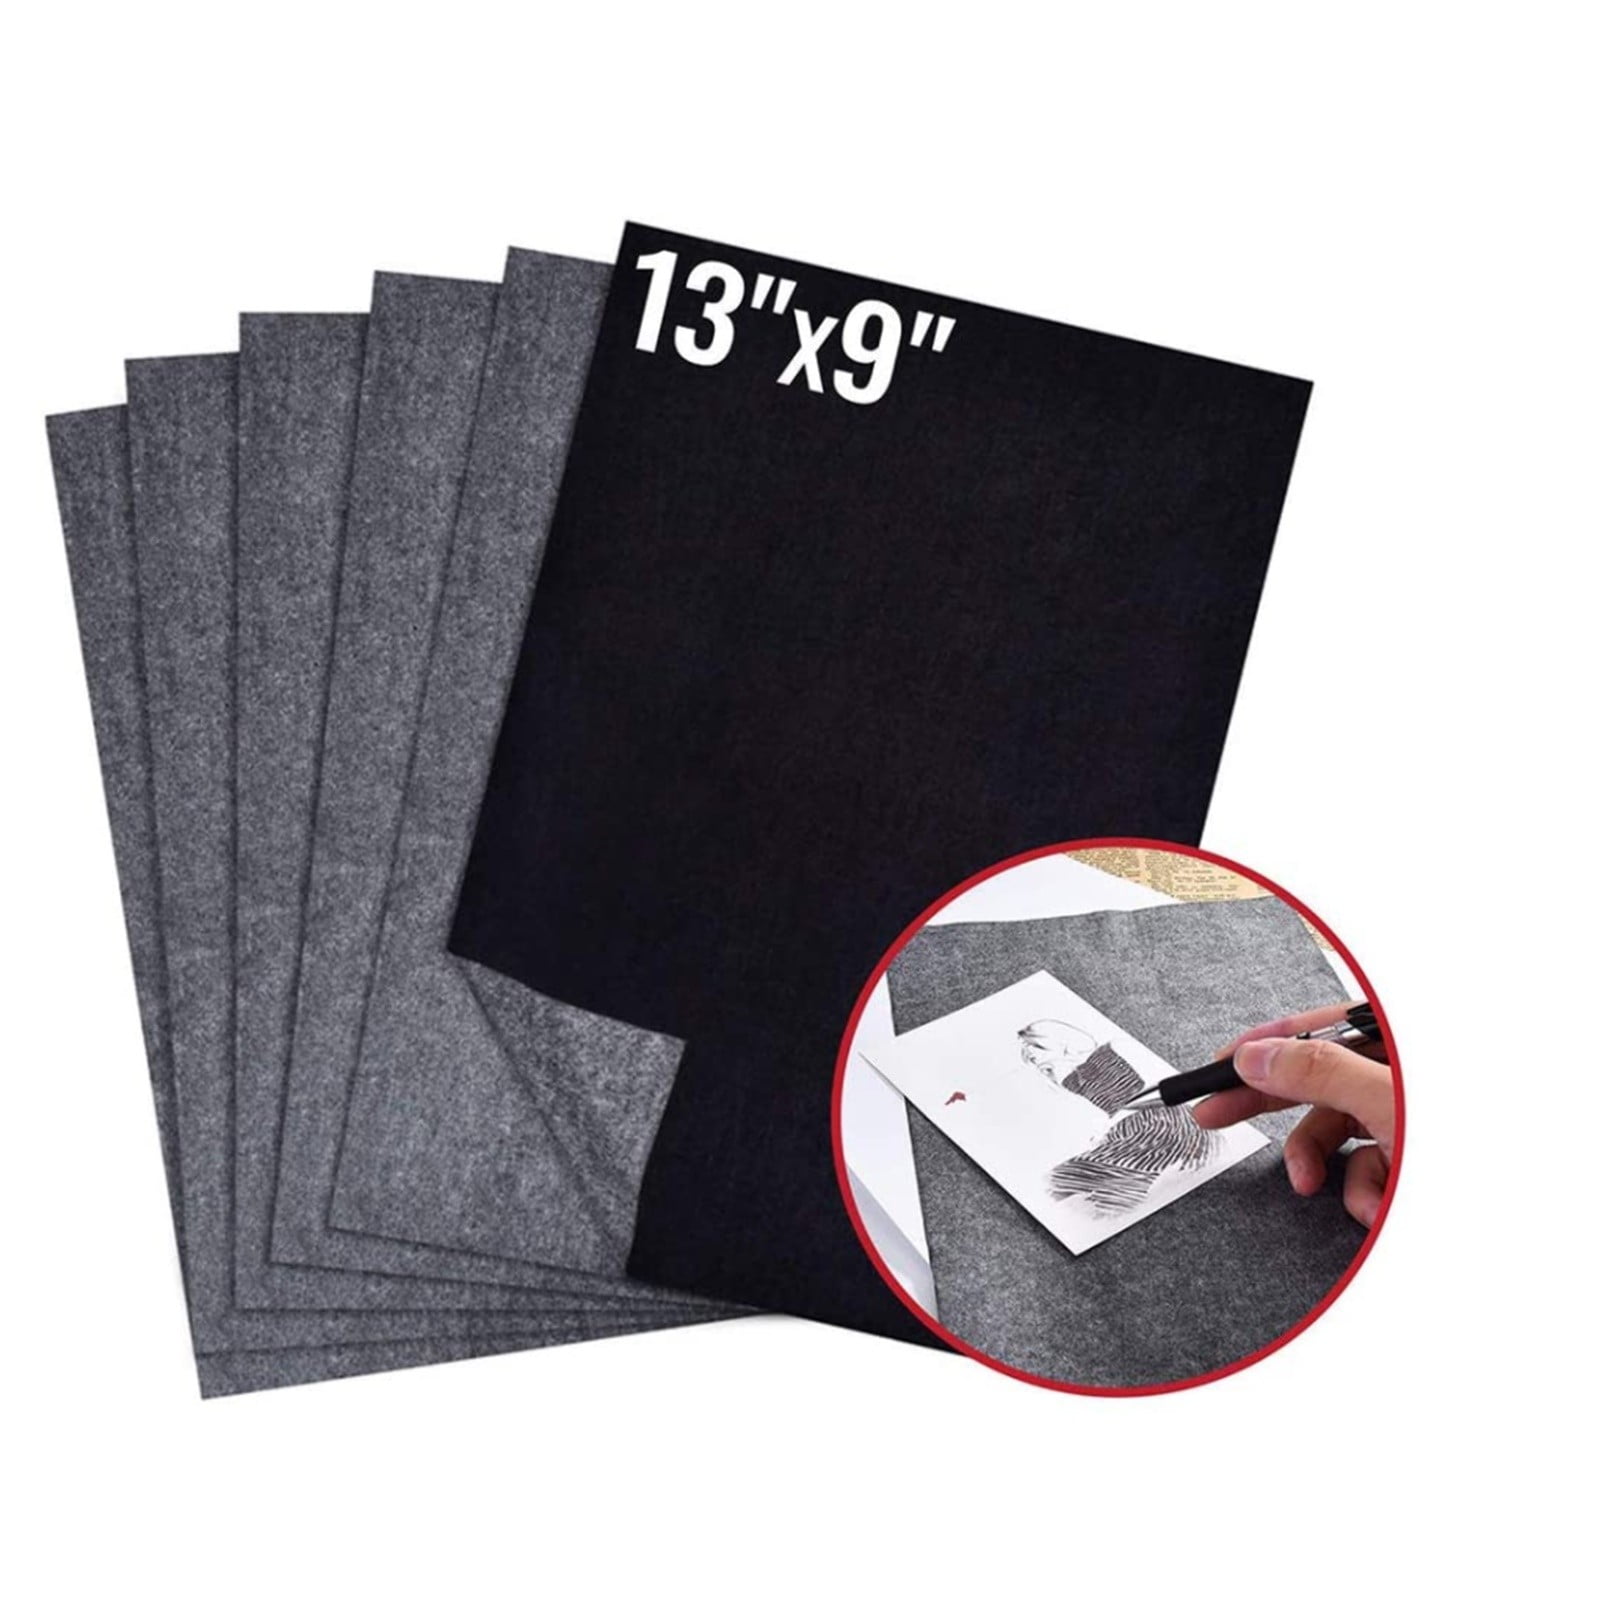 100 Pcs Carbon Paper Transfer Copy Sheets Graphite Tracing A4 for Wood Canvas